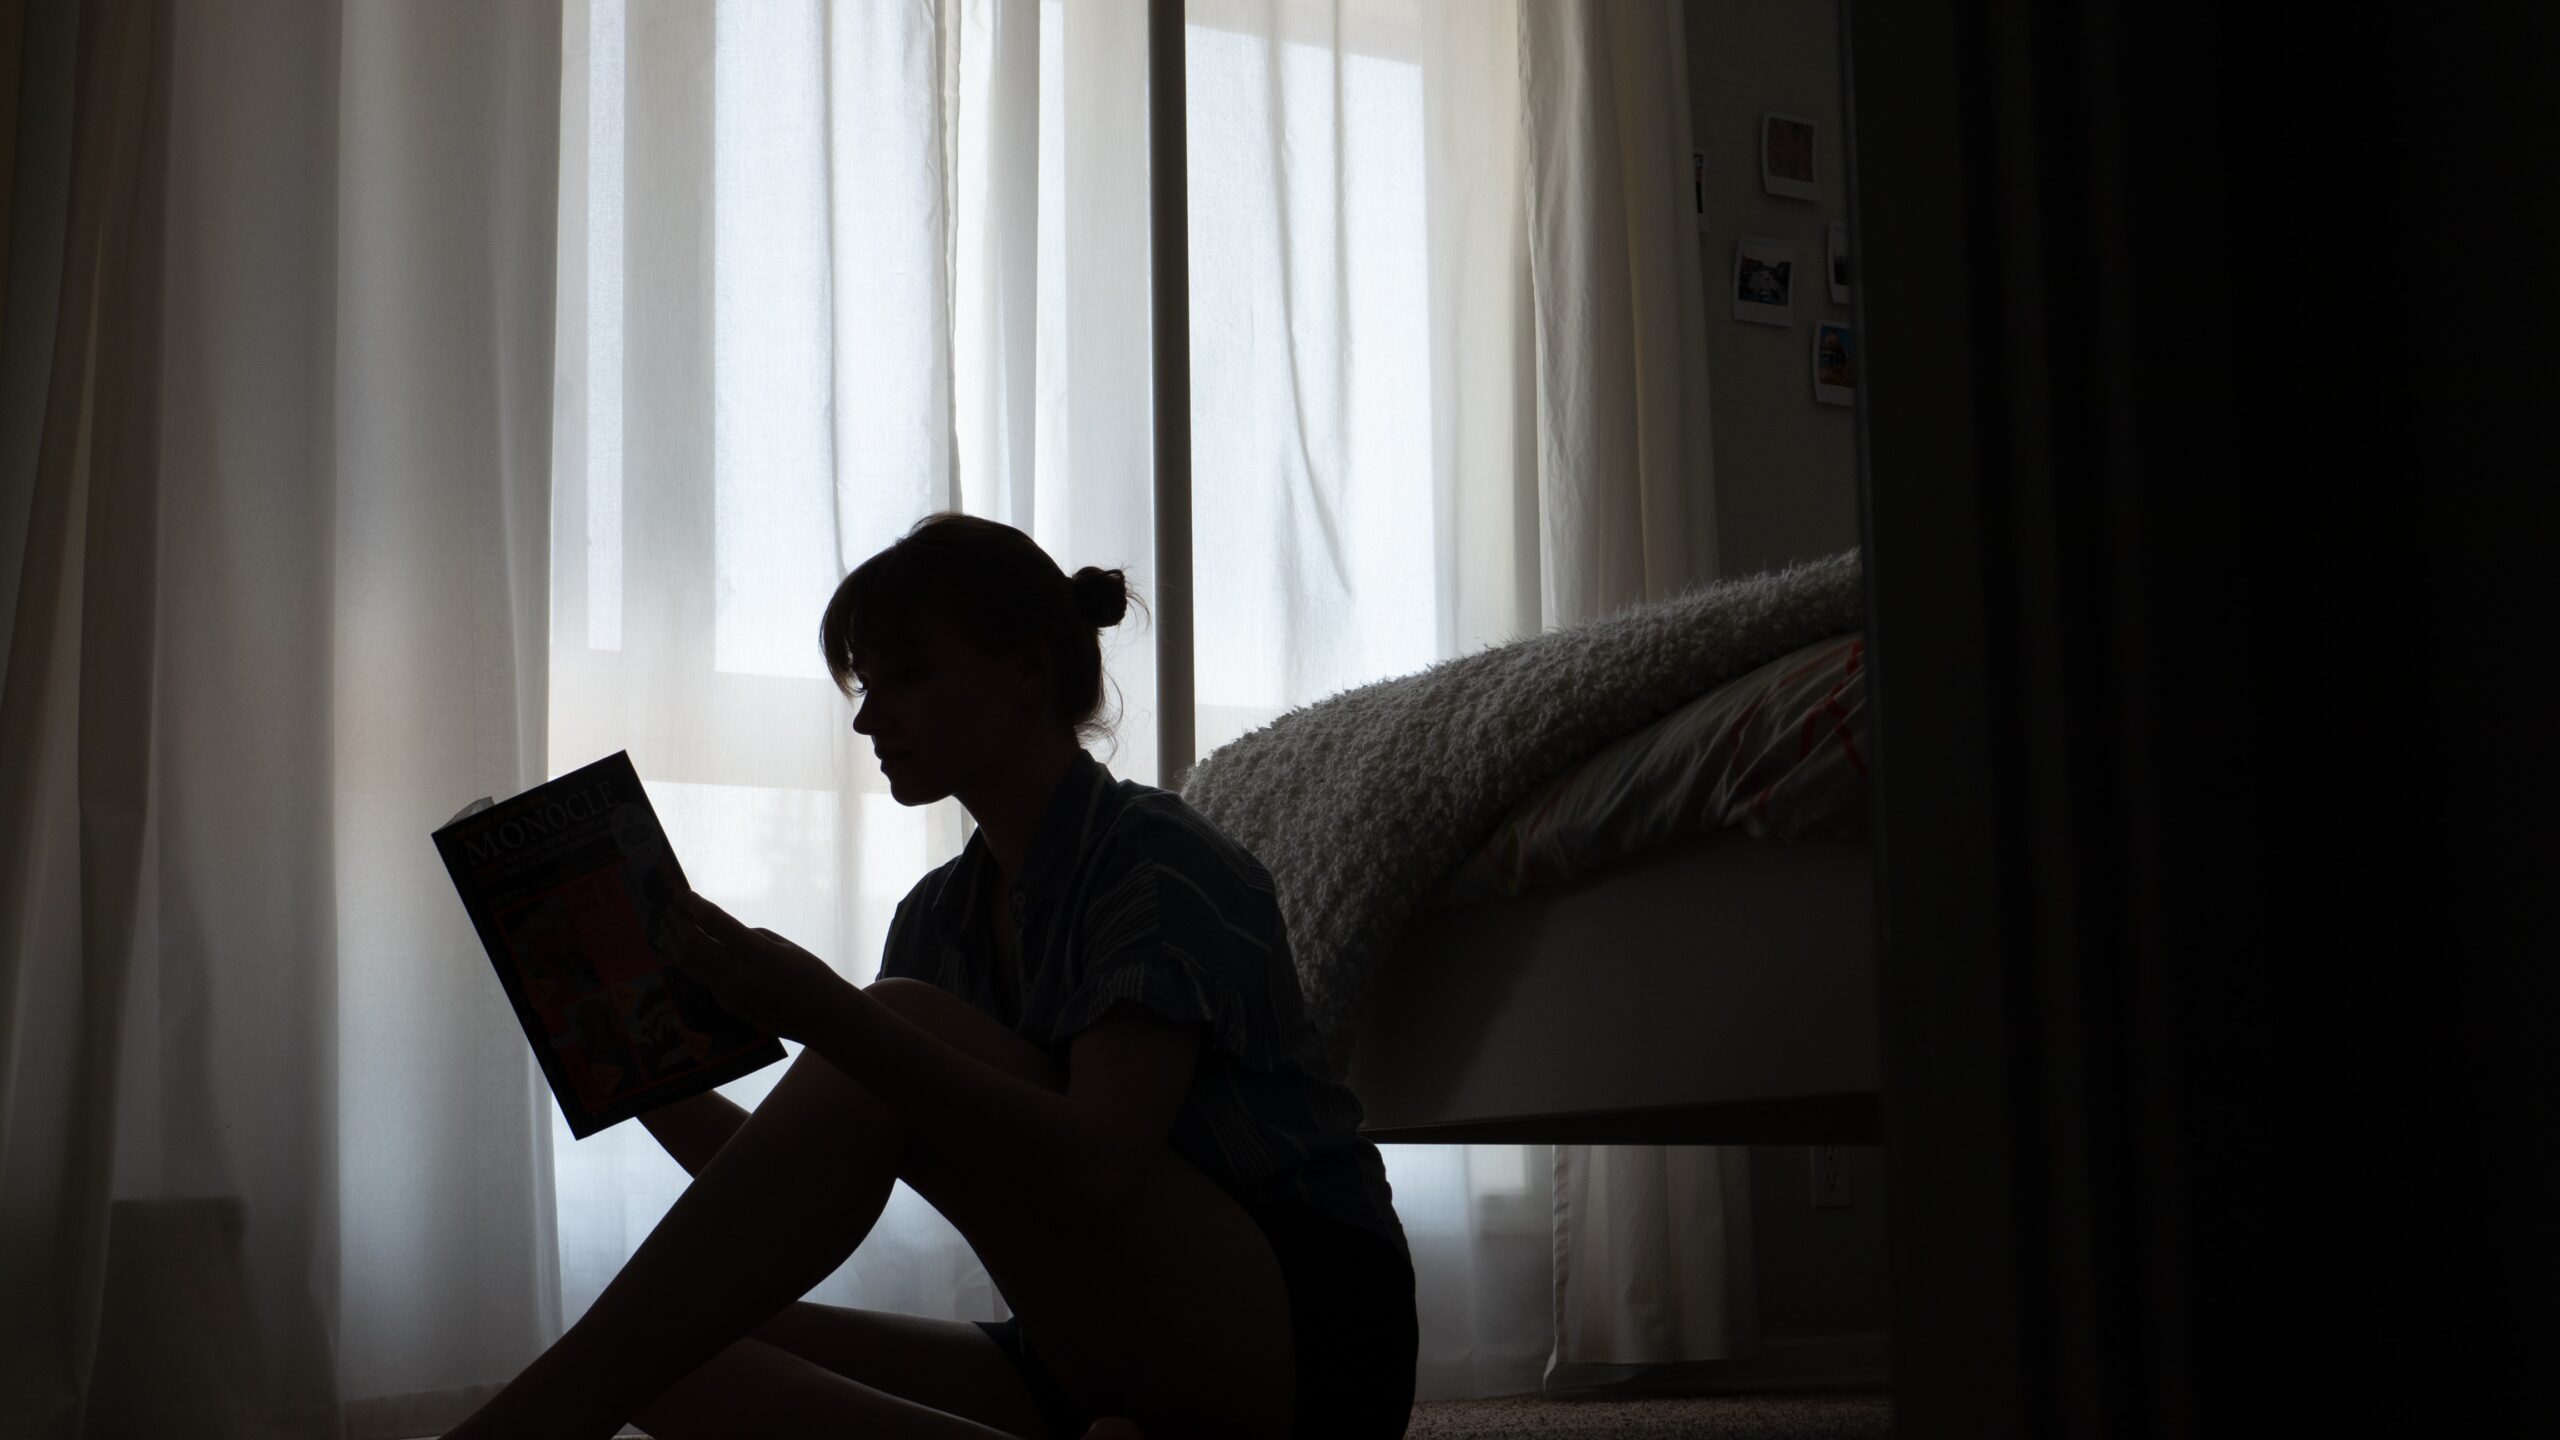 silhouette of woman reading book on floor